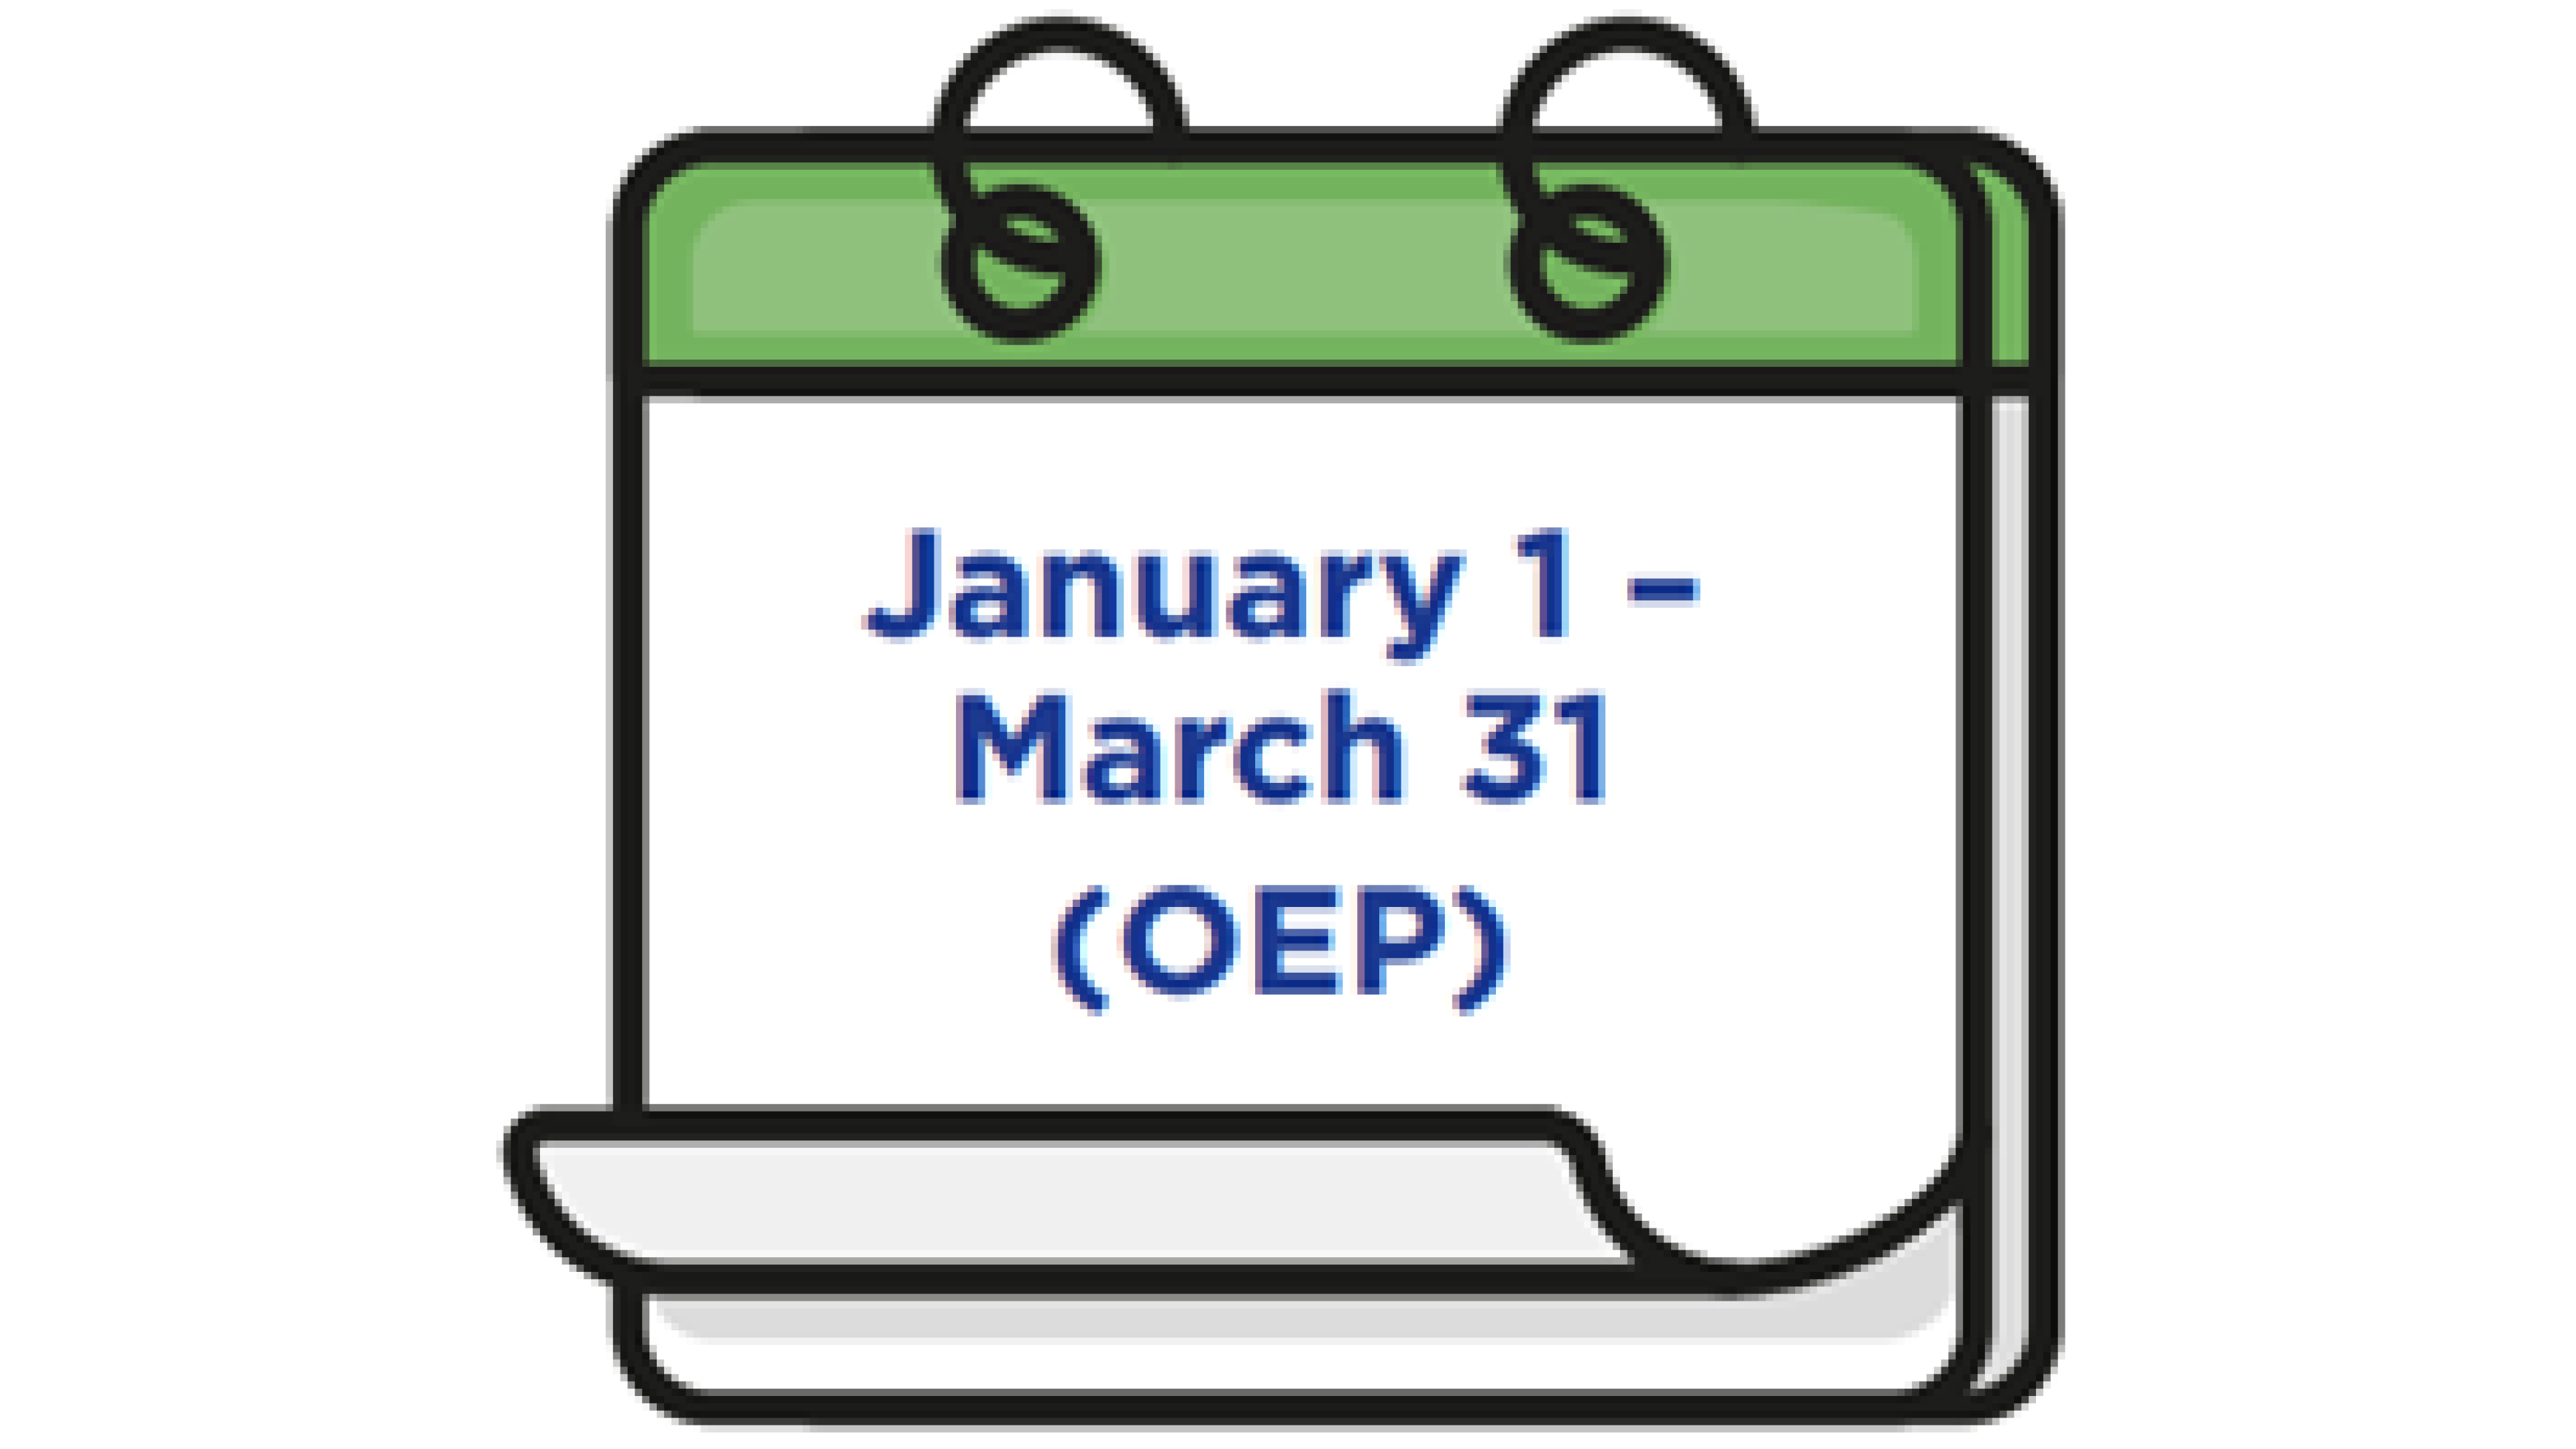 A calendar is shown with the text January 1 - March 31 (OEP).